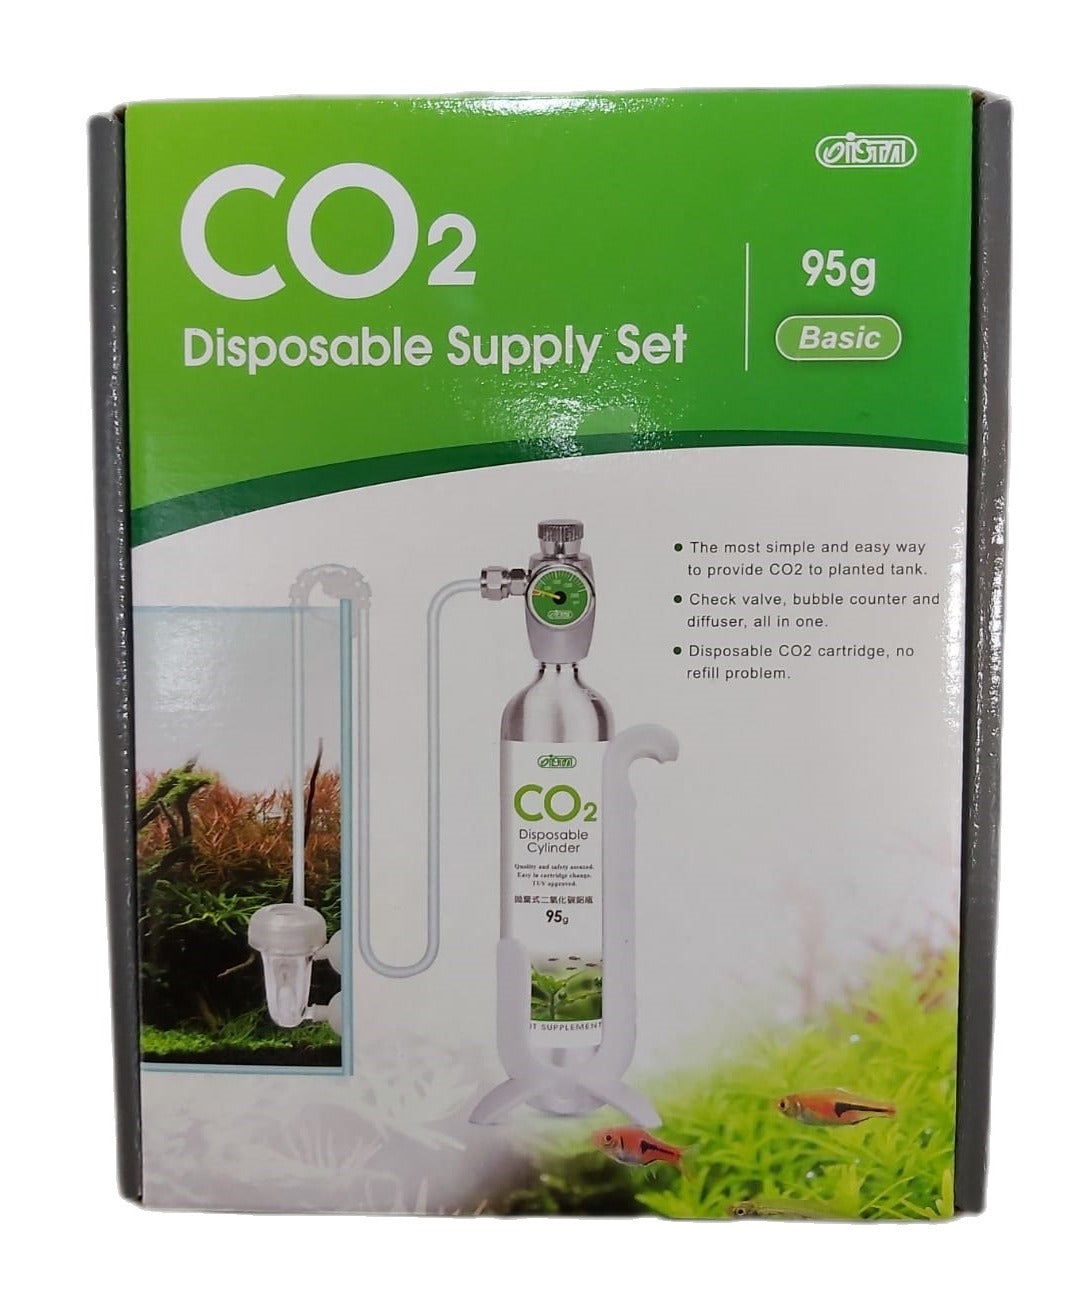 ISTA CO2 DISPOSABLE SUPPLY SET 95g